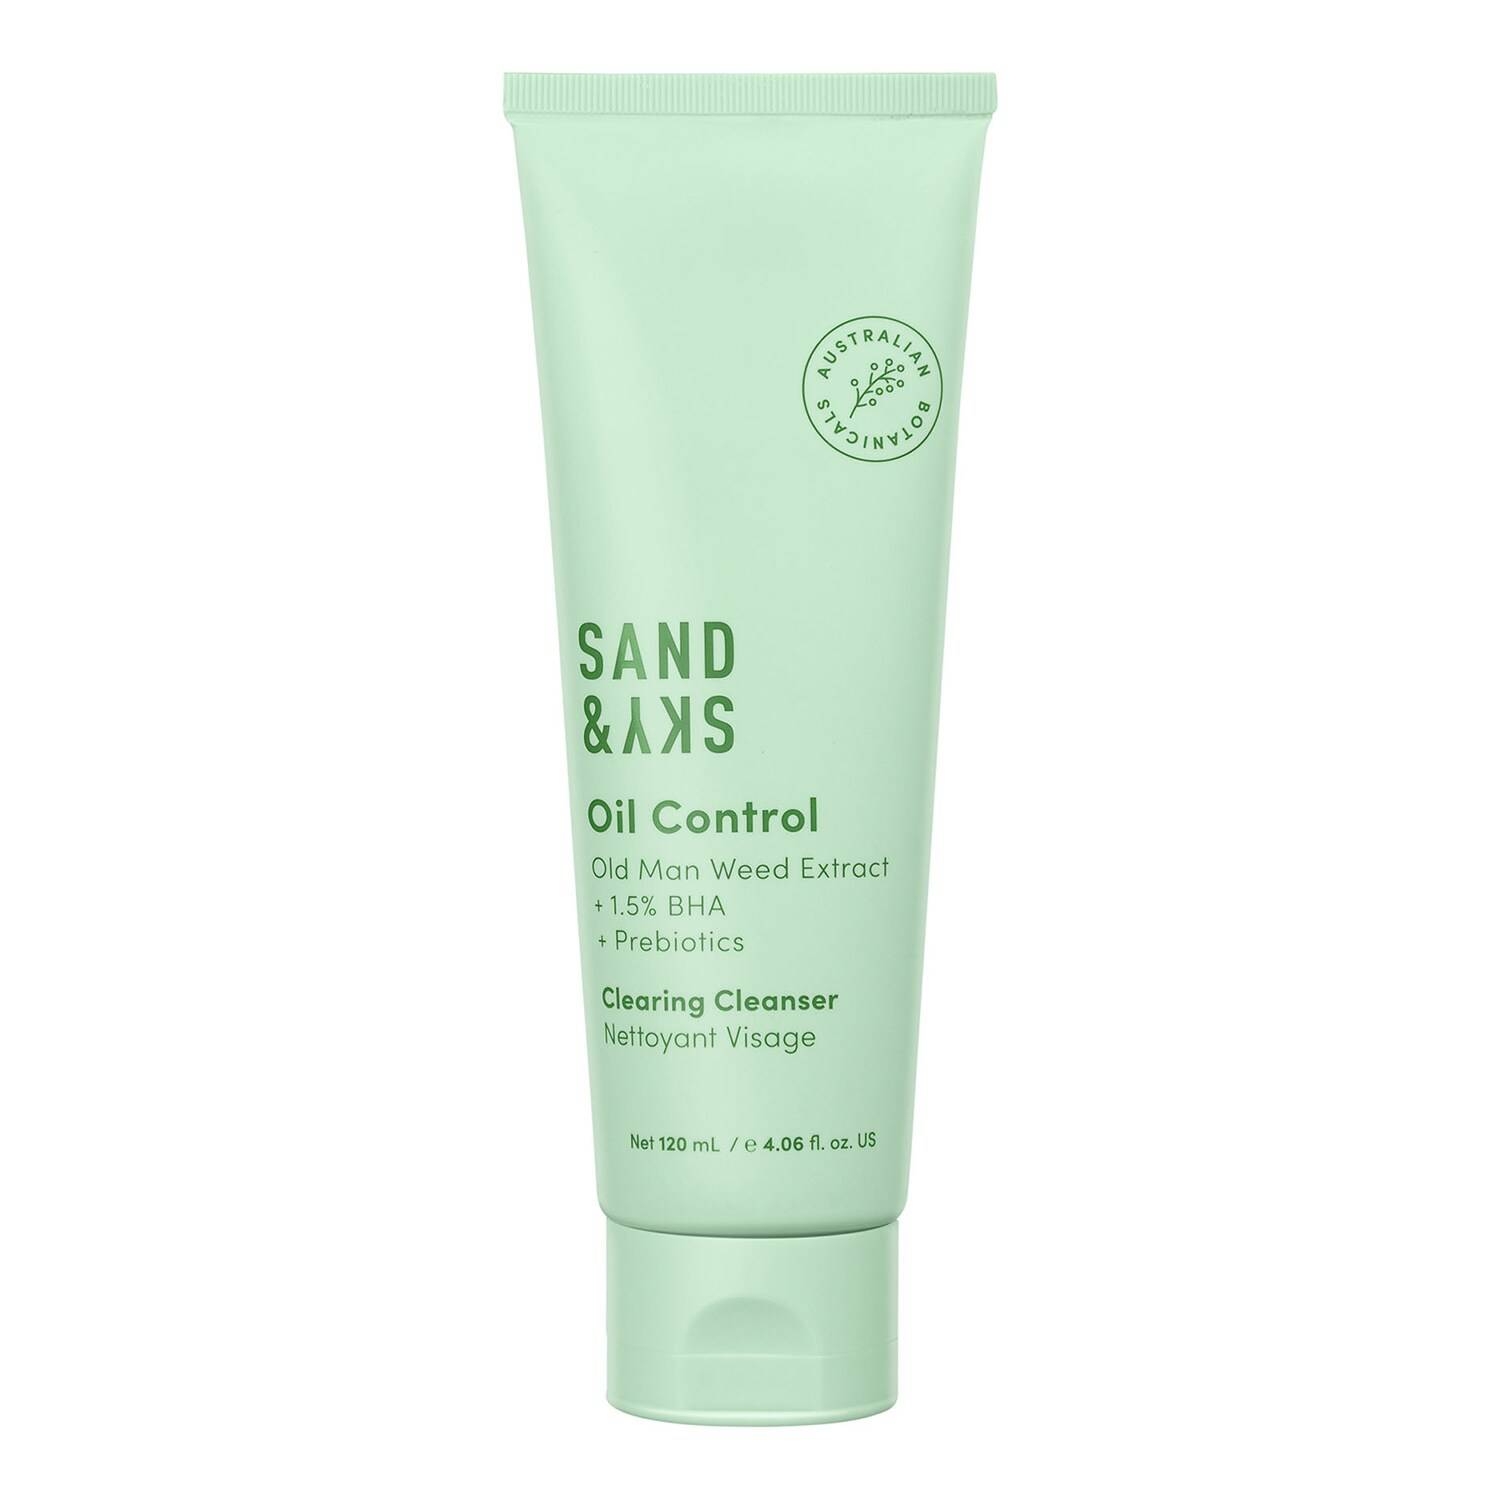 SAND & SKY Oil Control - Clearing Cleanser 120ml